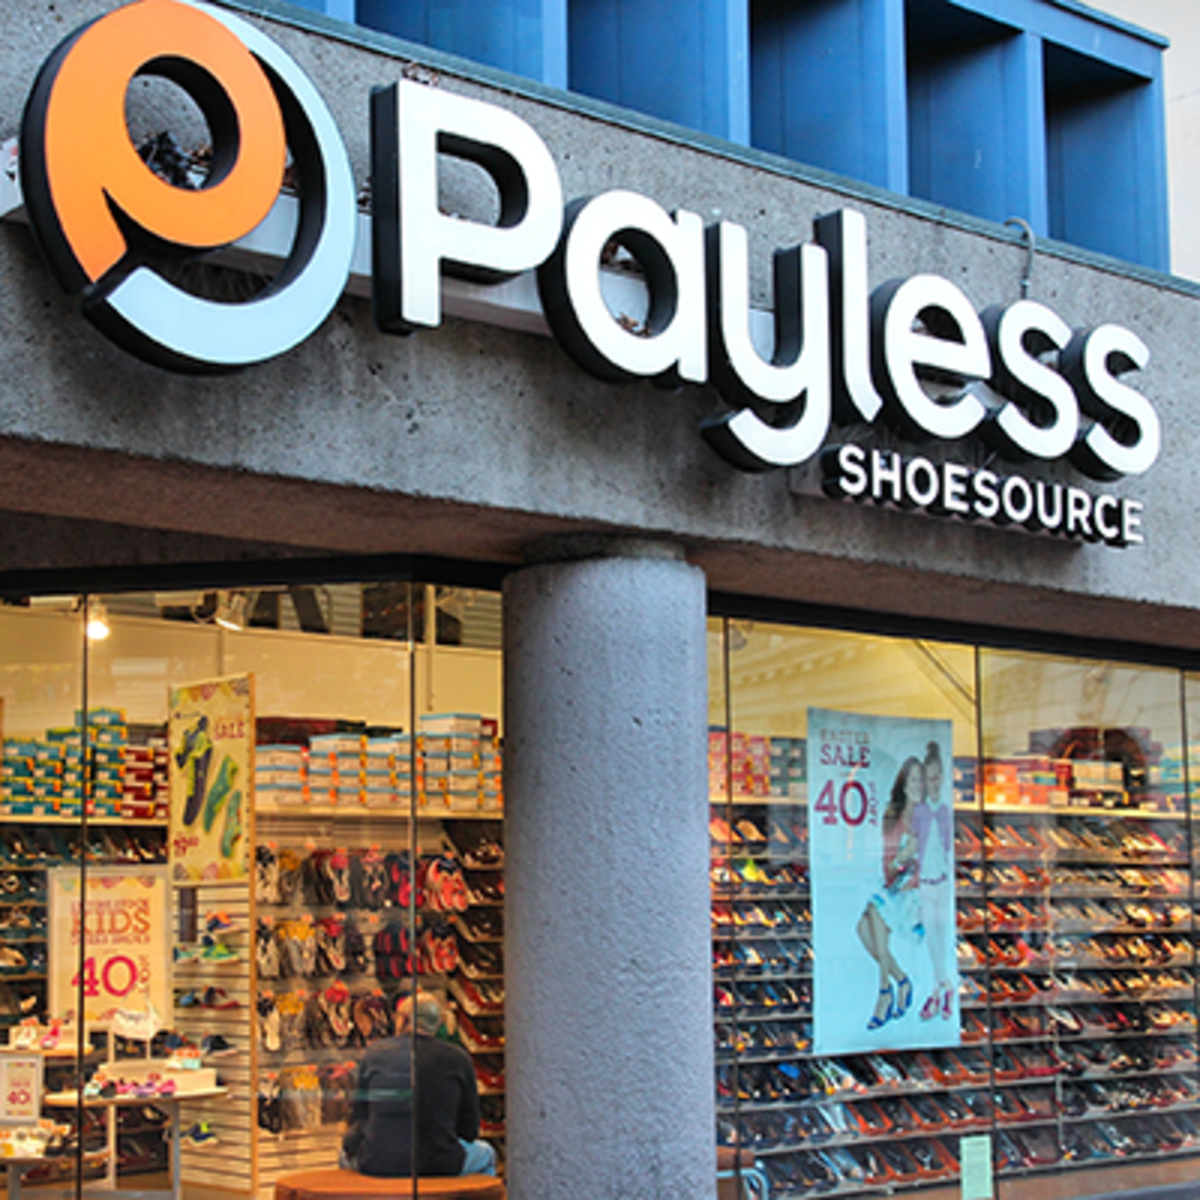 payless ceo